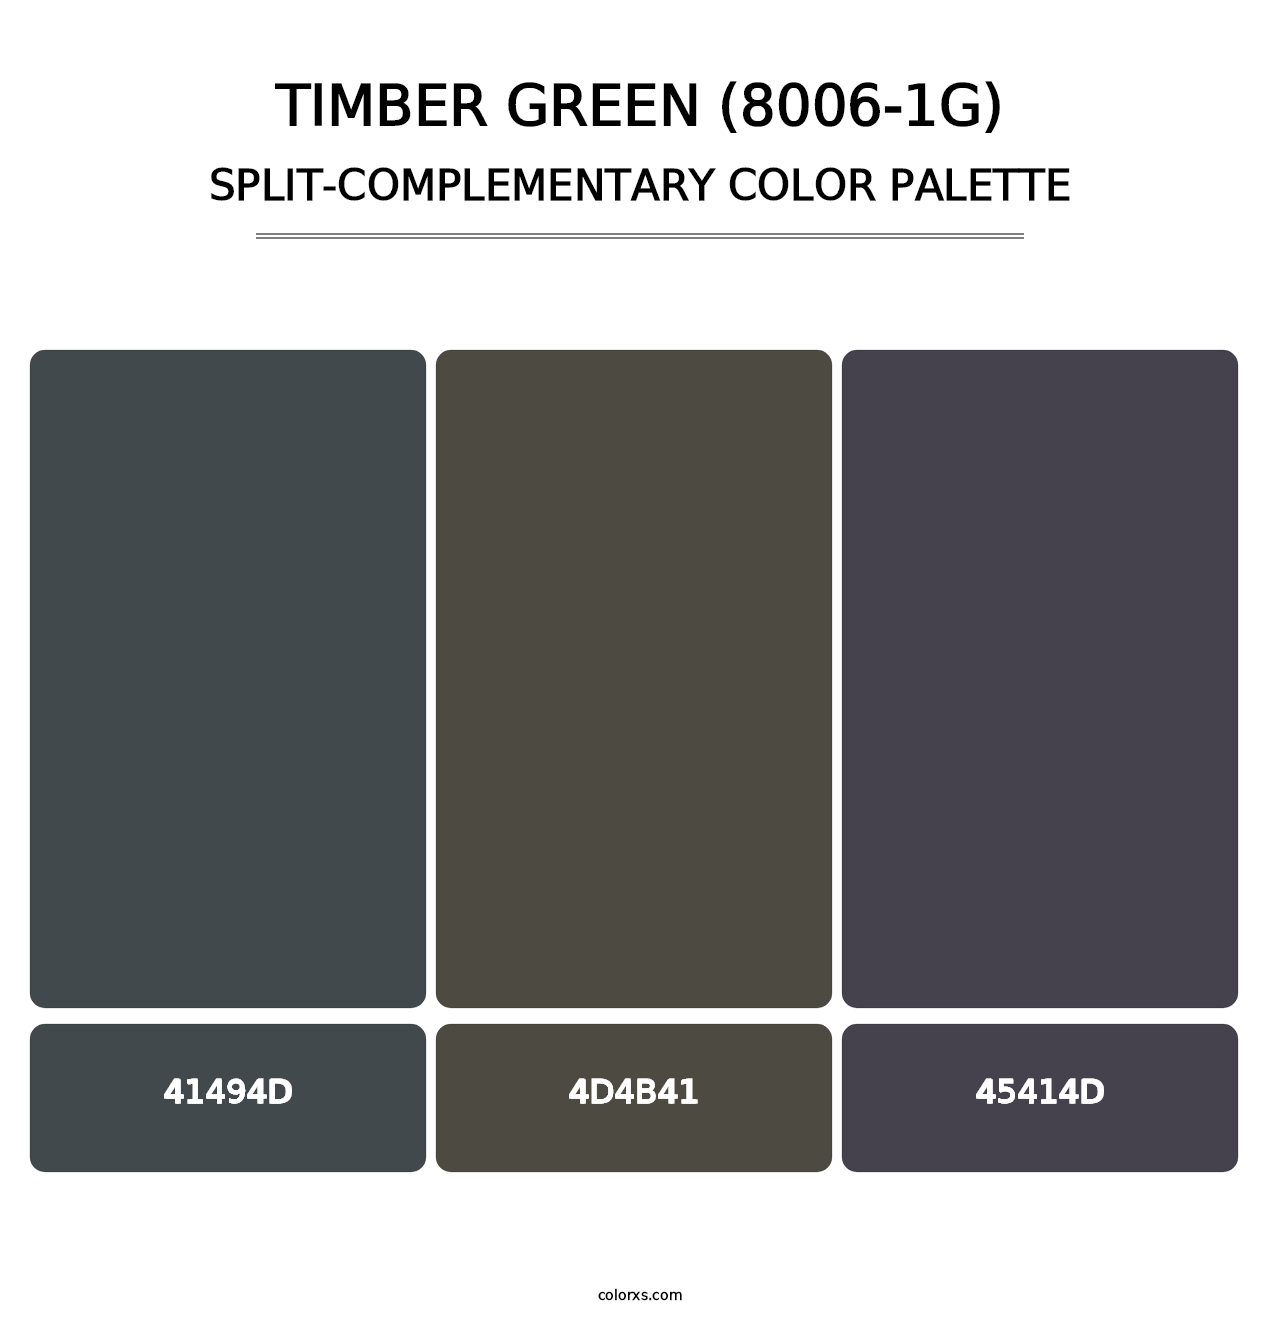 Timber Green (8006-1G) - Split-Complementary Color Palette